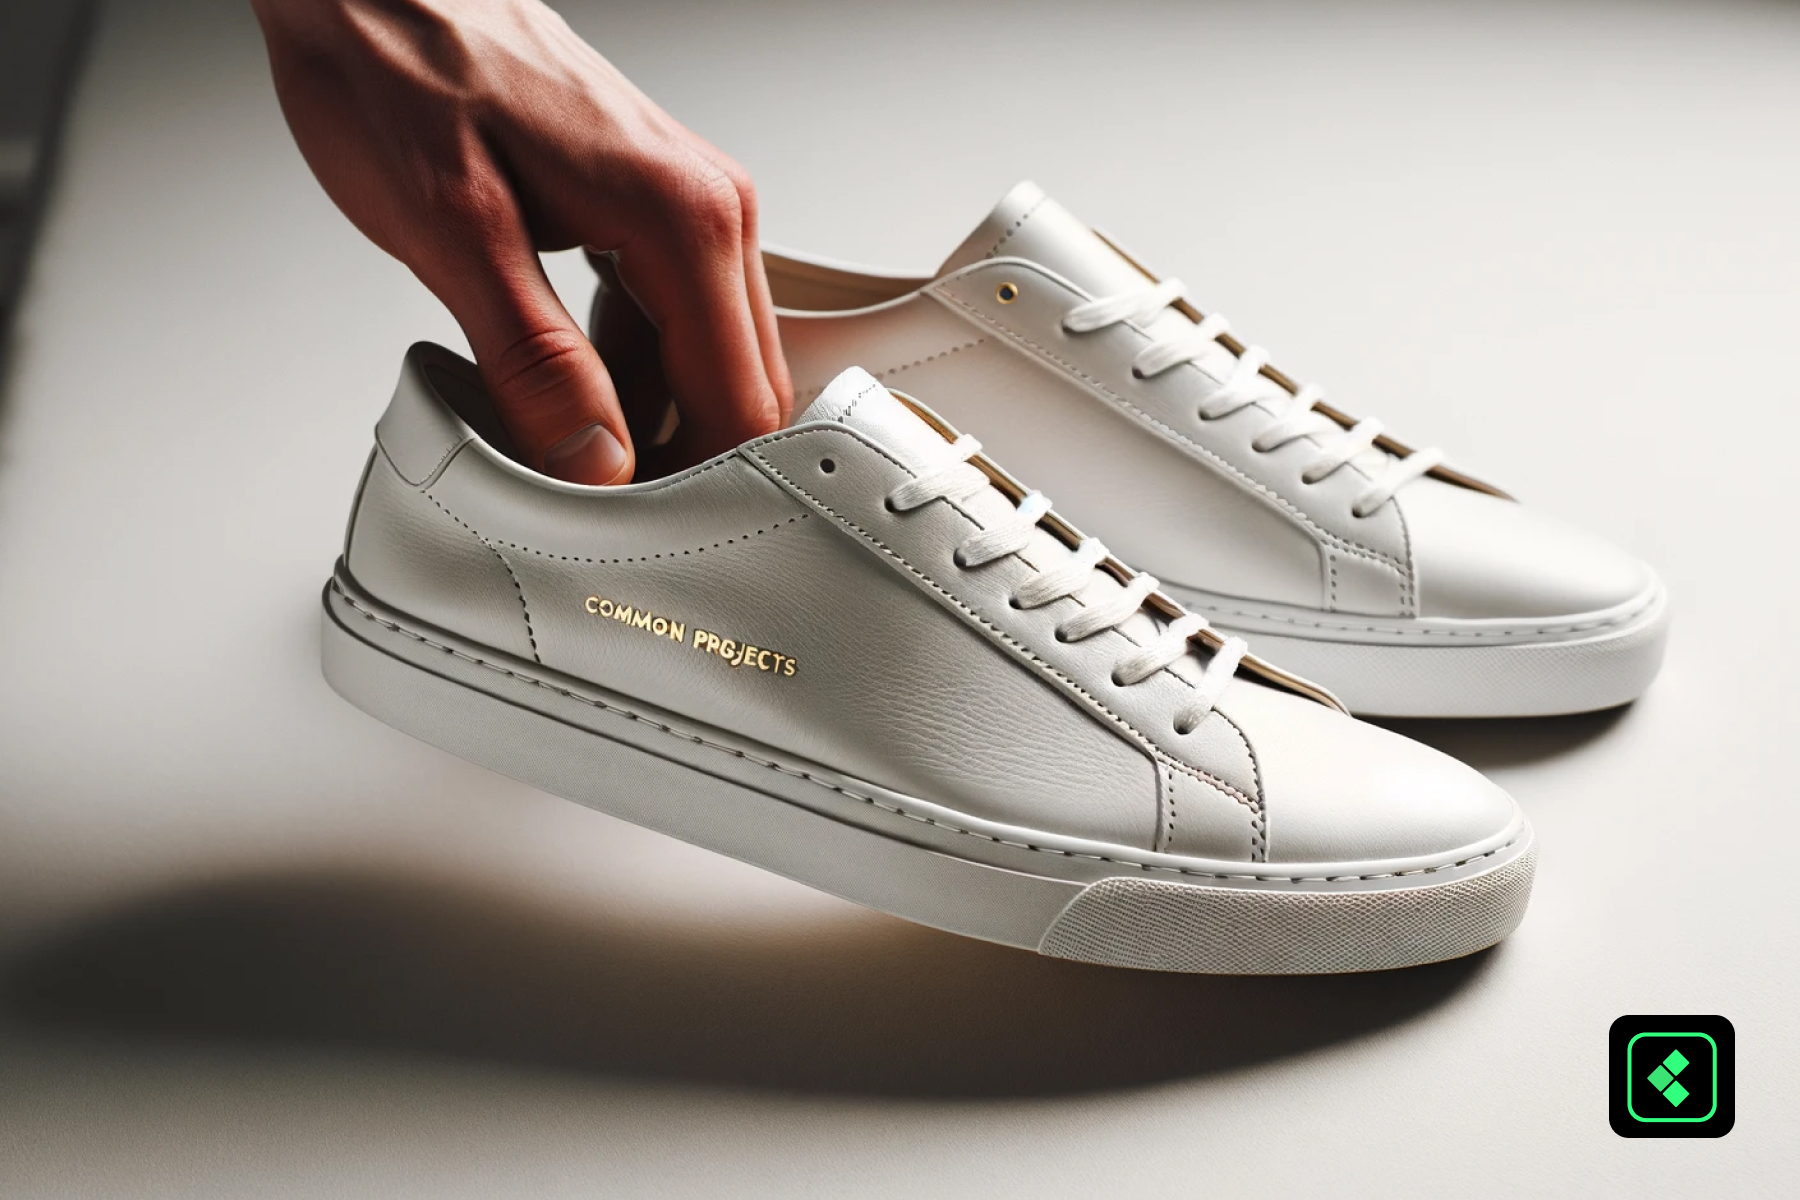 Illustration - Hand Holding A Pair Of Common Projects Achilles